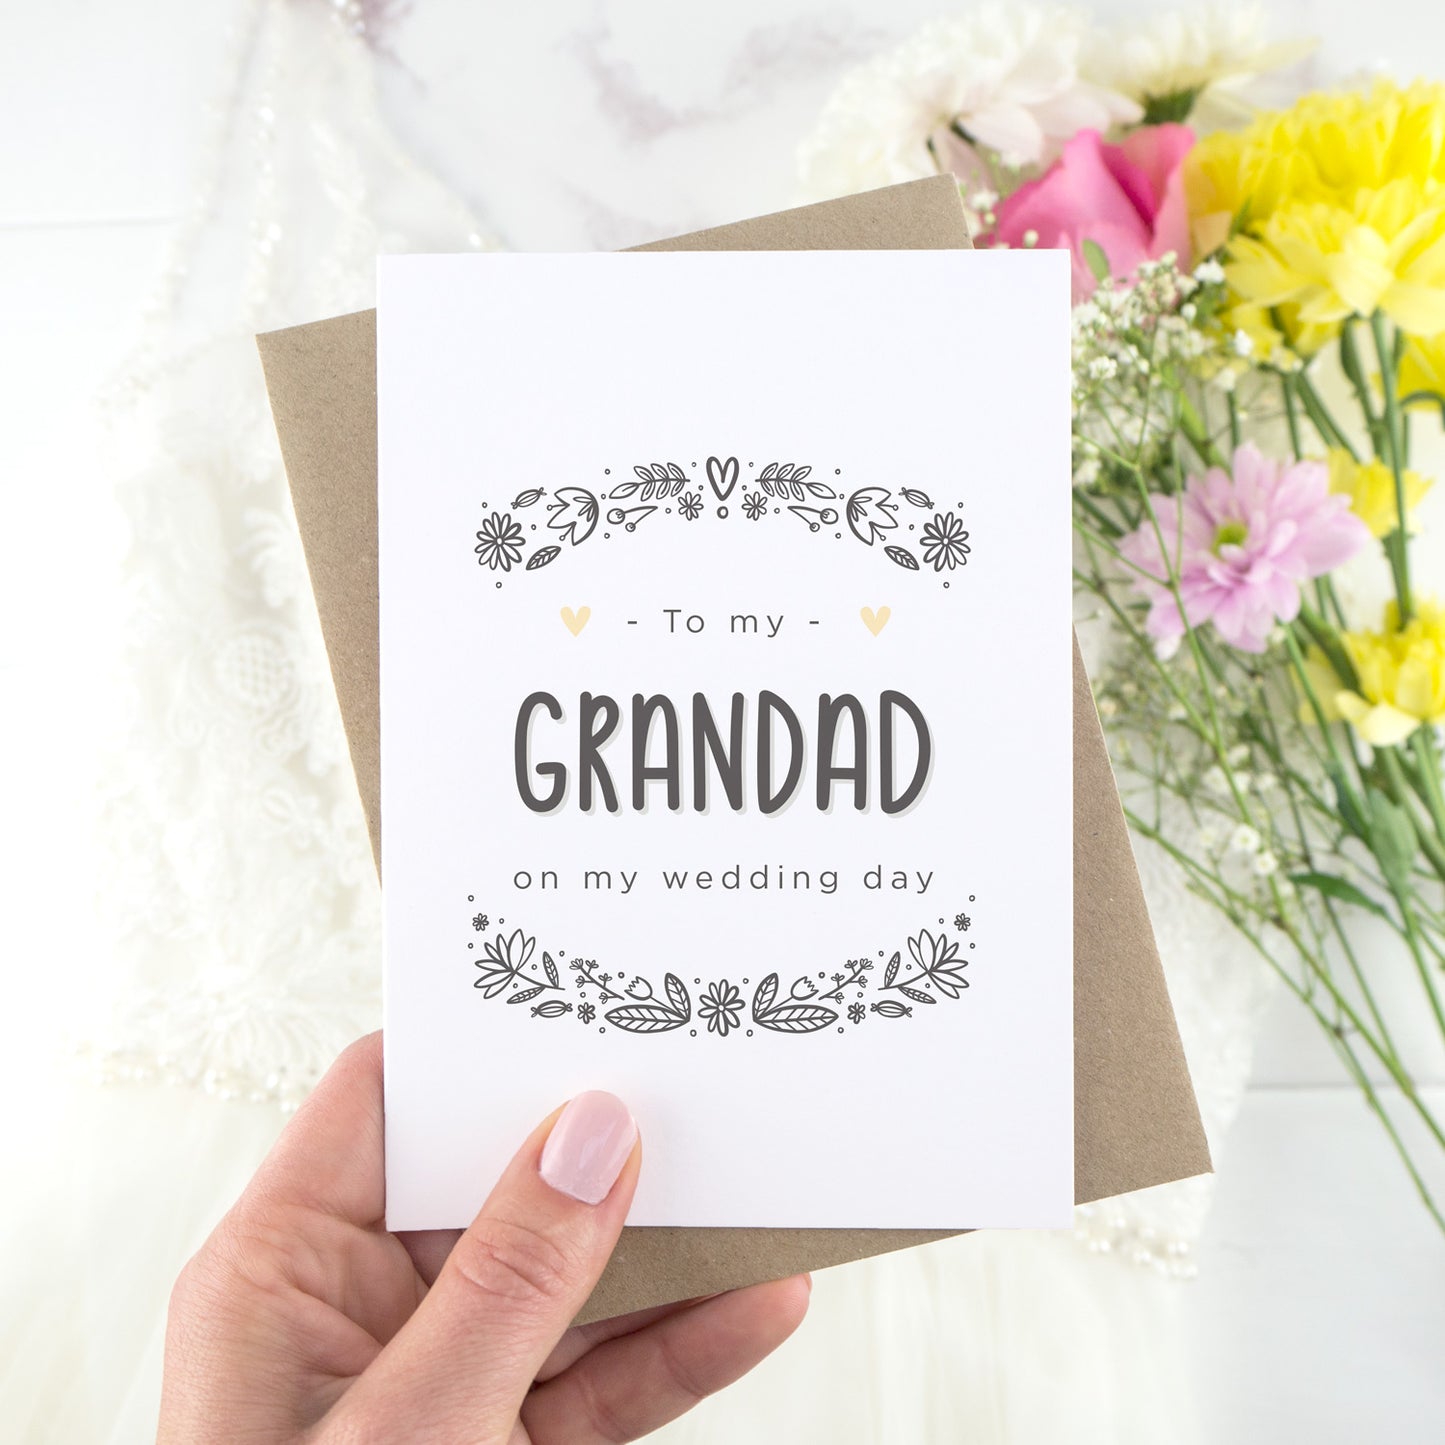 To my grandad on my wedding day. A white card with grey hand drawn lettering, and a grey floral border. The image features a wedding dress and bouquet of flowers.